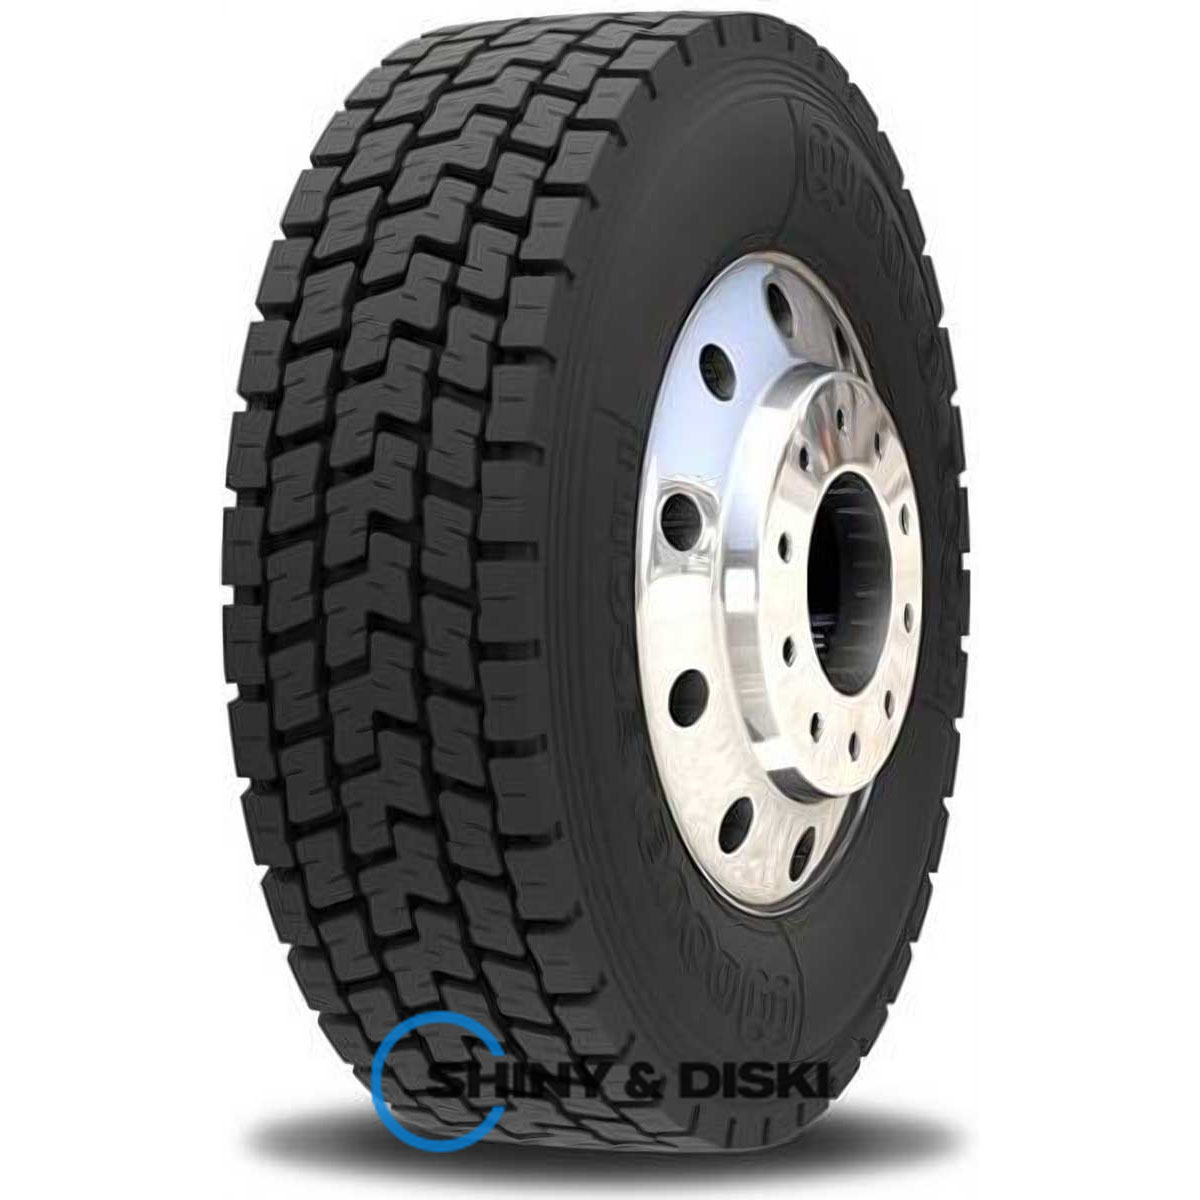 double coin rlb450 (ведущая ось) 295/80 r22.5 152/149m